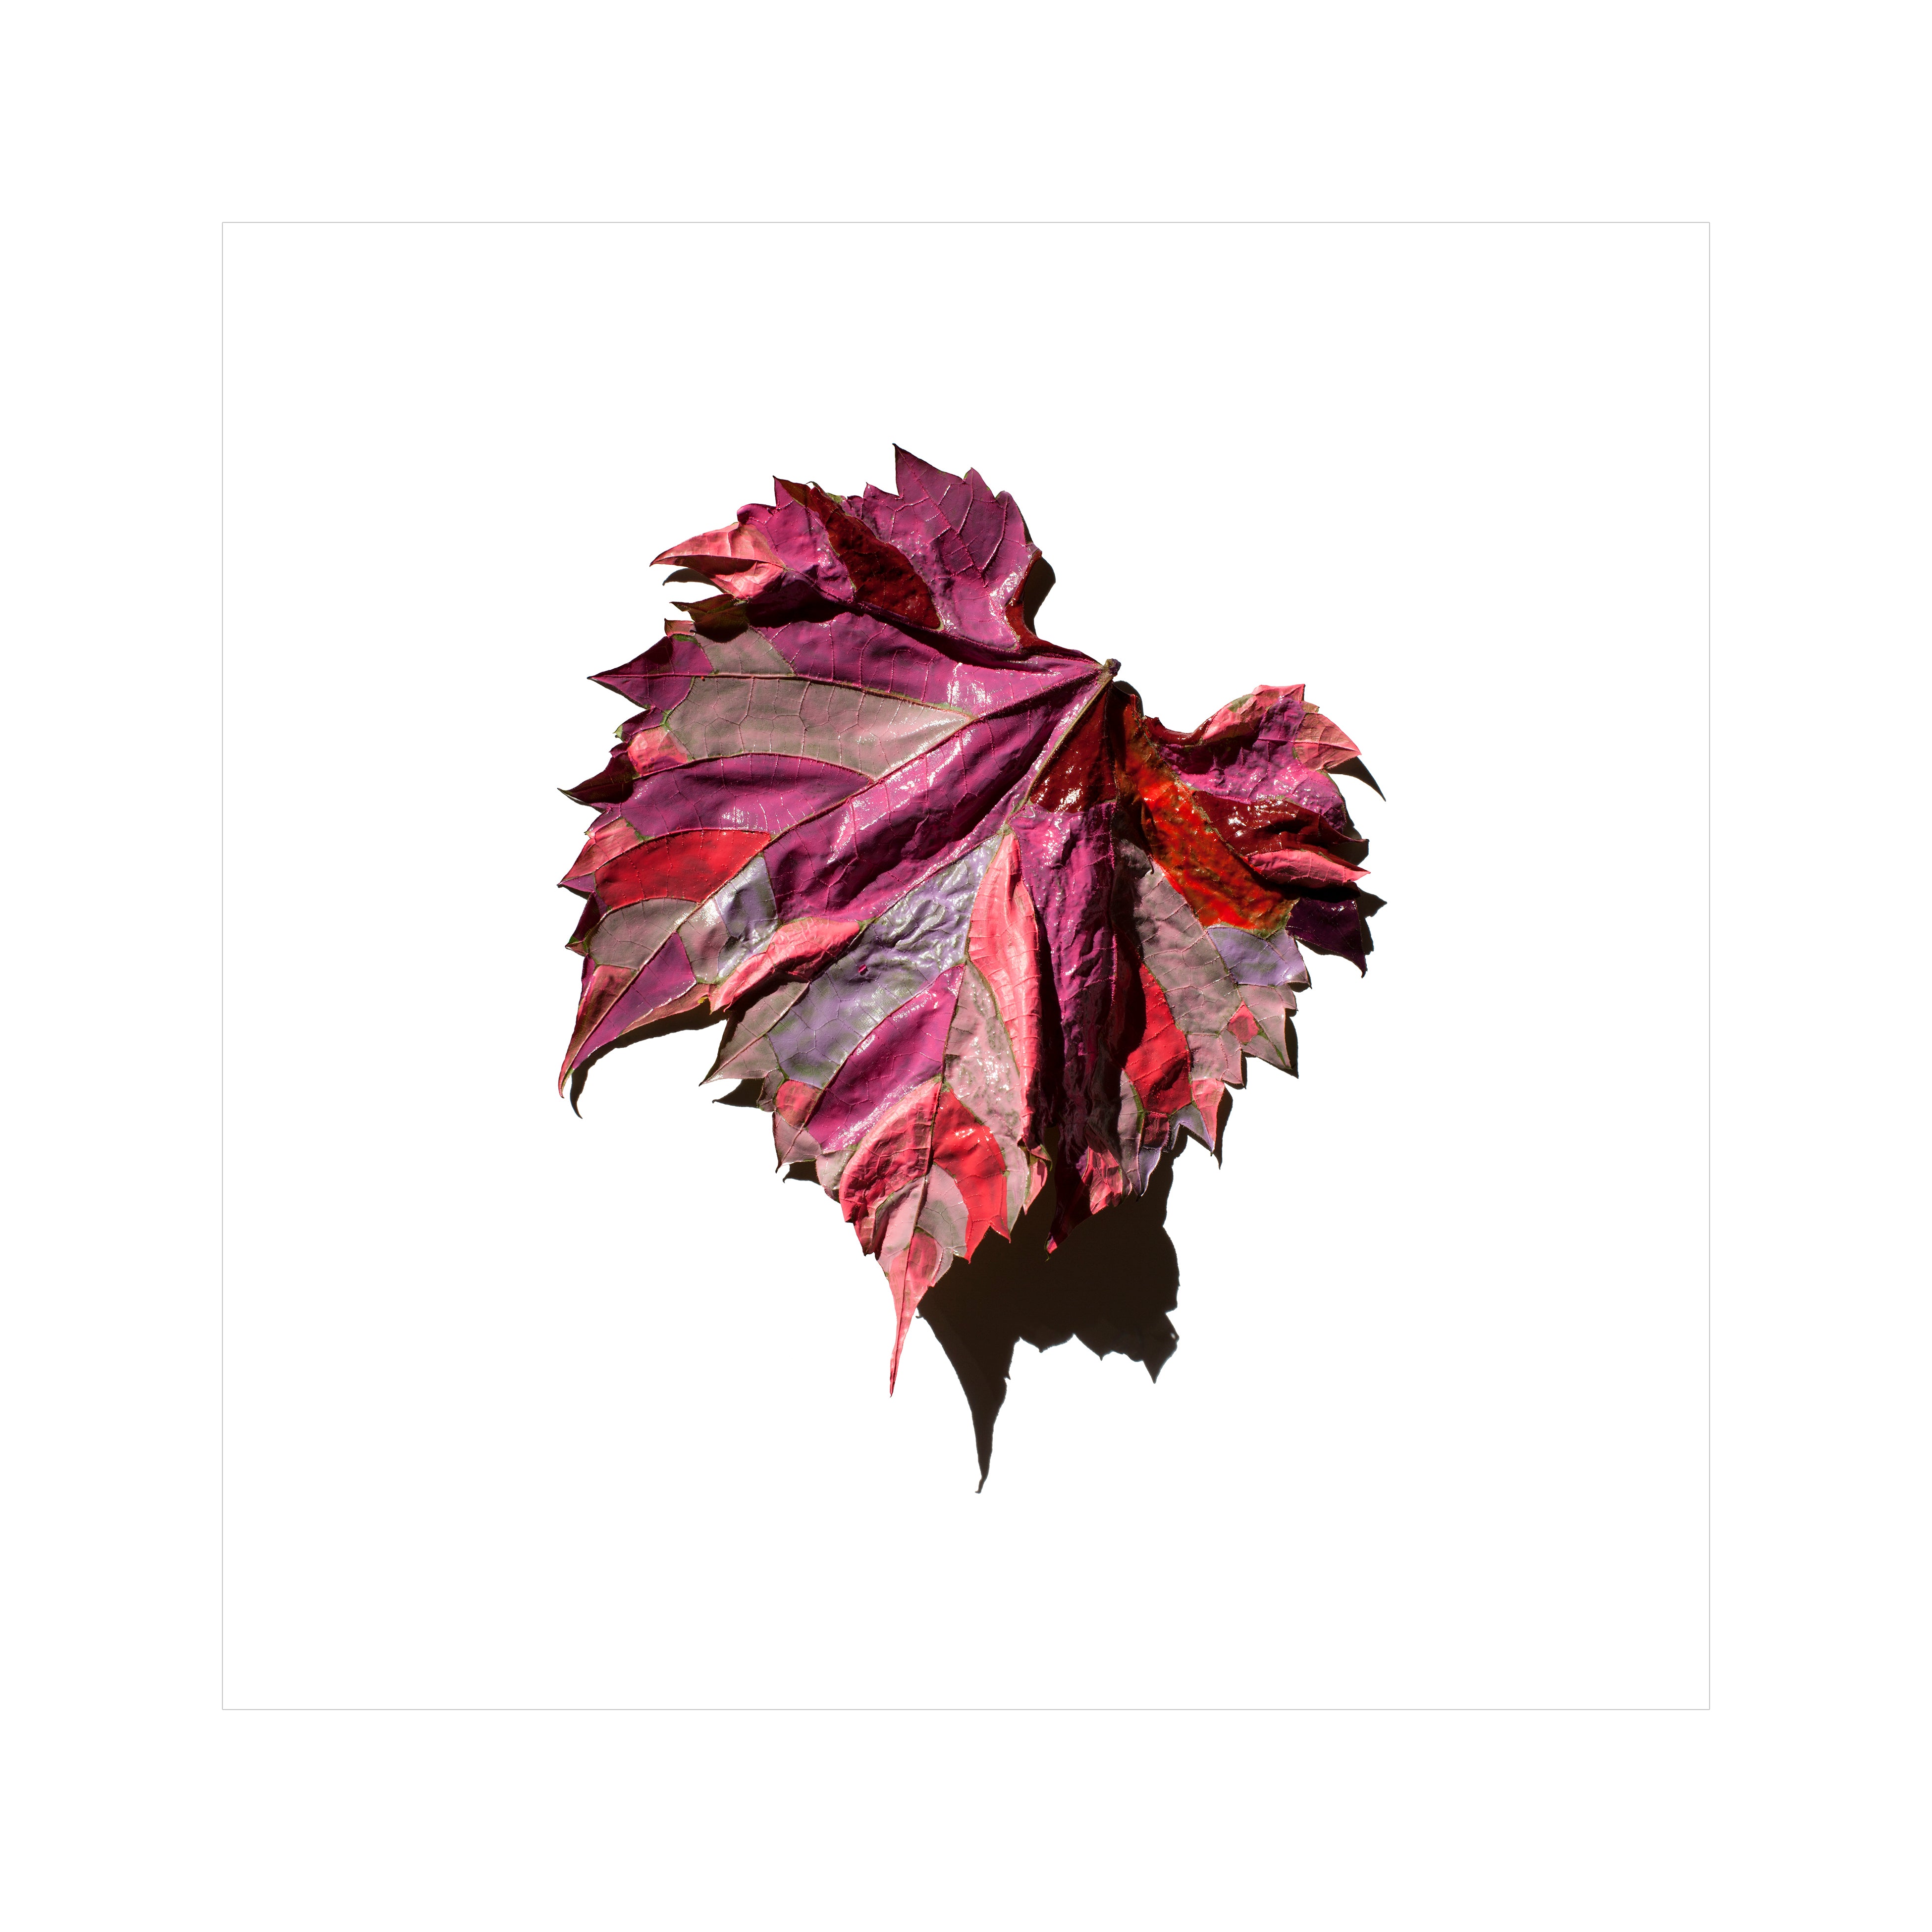 FUTURE PROOF 2024 Lot 56 - Jennifer Long - Untitled, from the Mended Leaves series